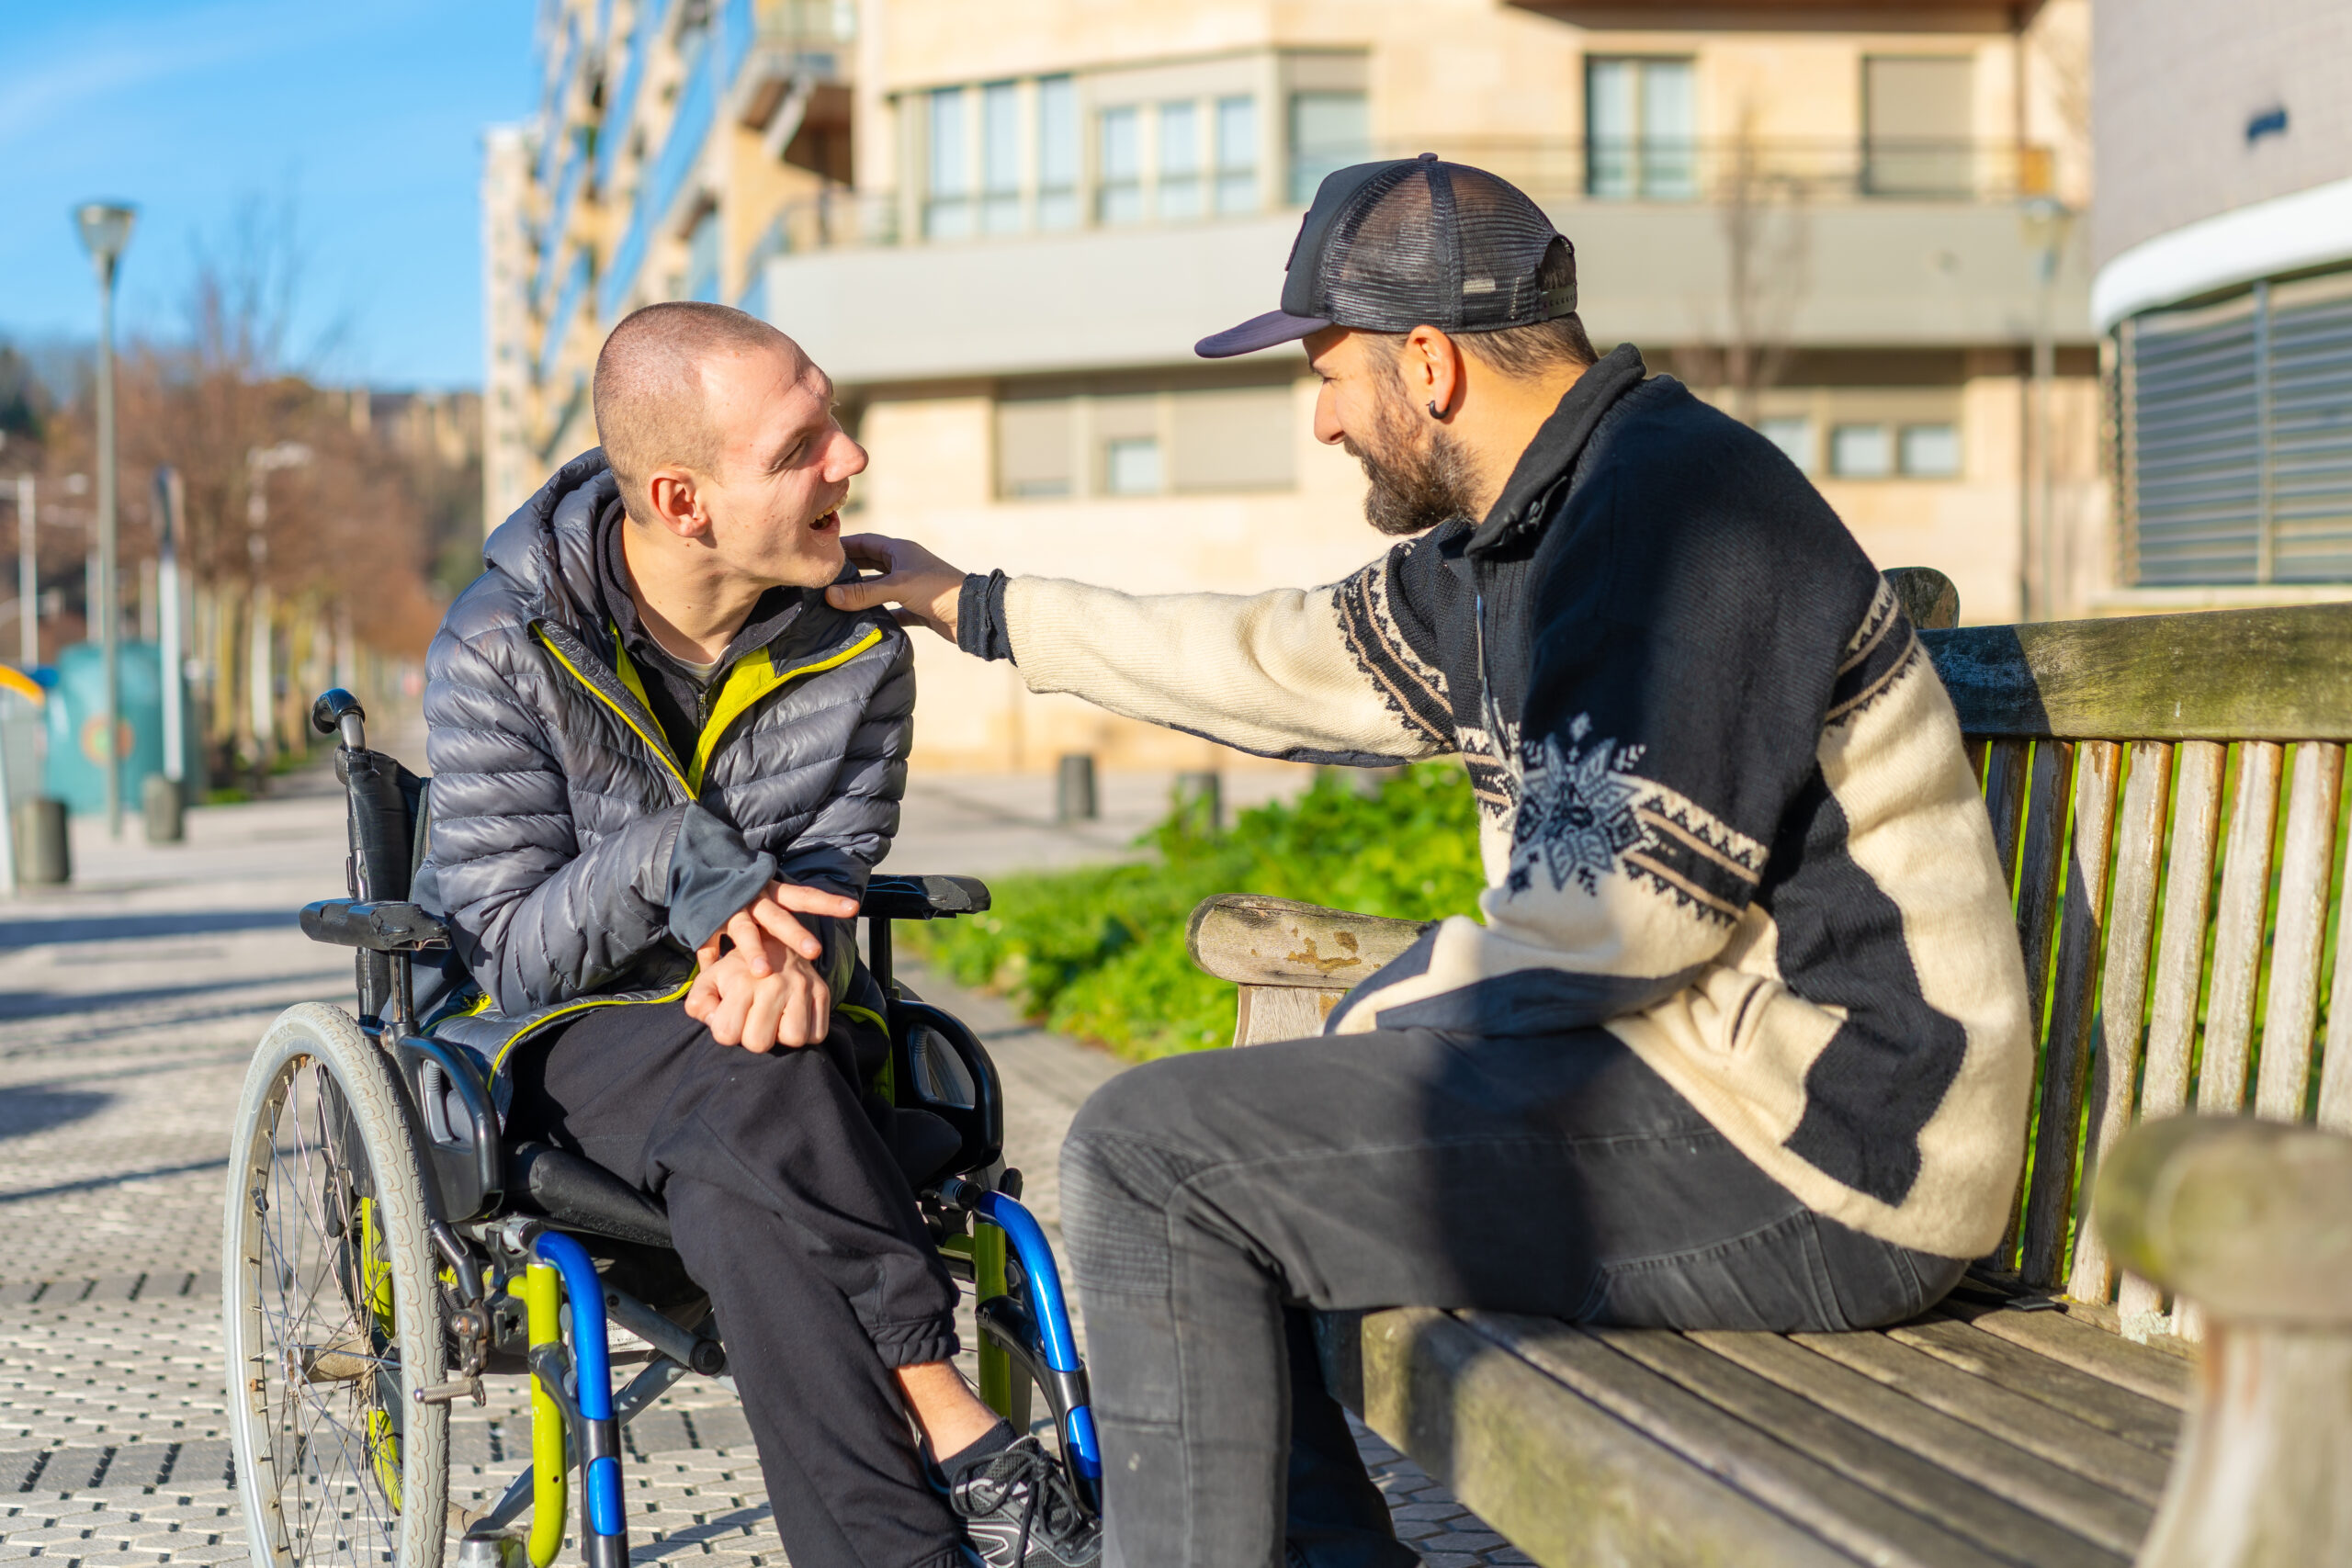 Disabled person in a wheelchair with a friend sitting having fun and talking